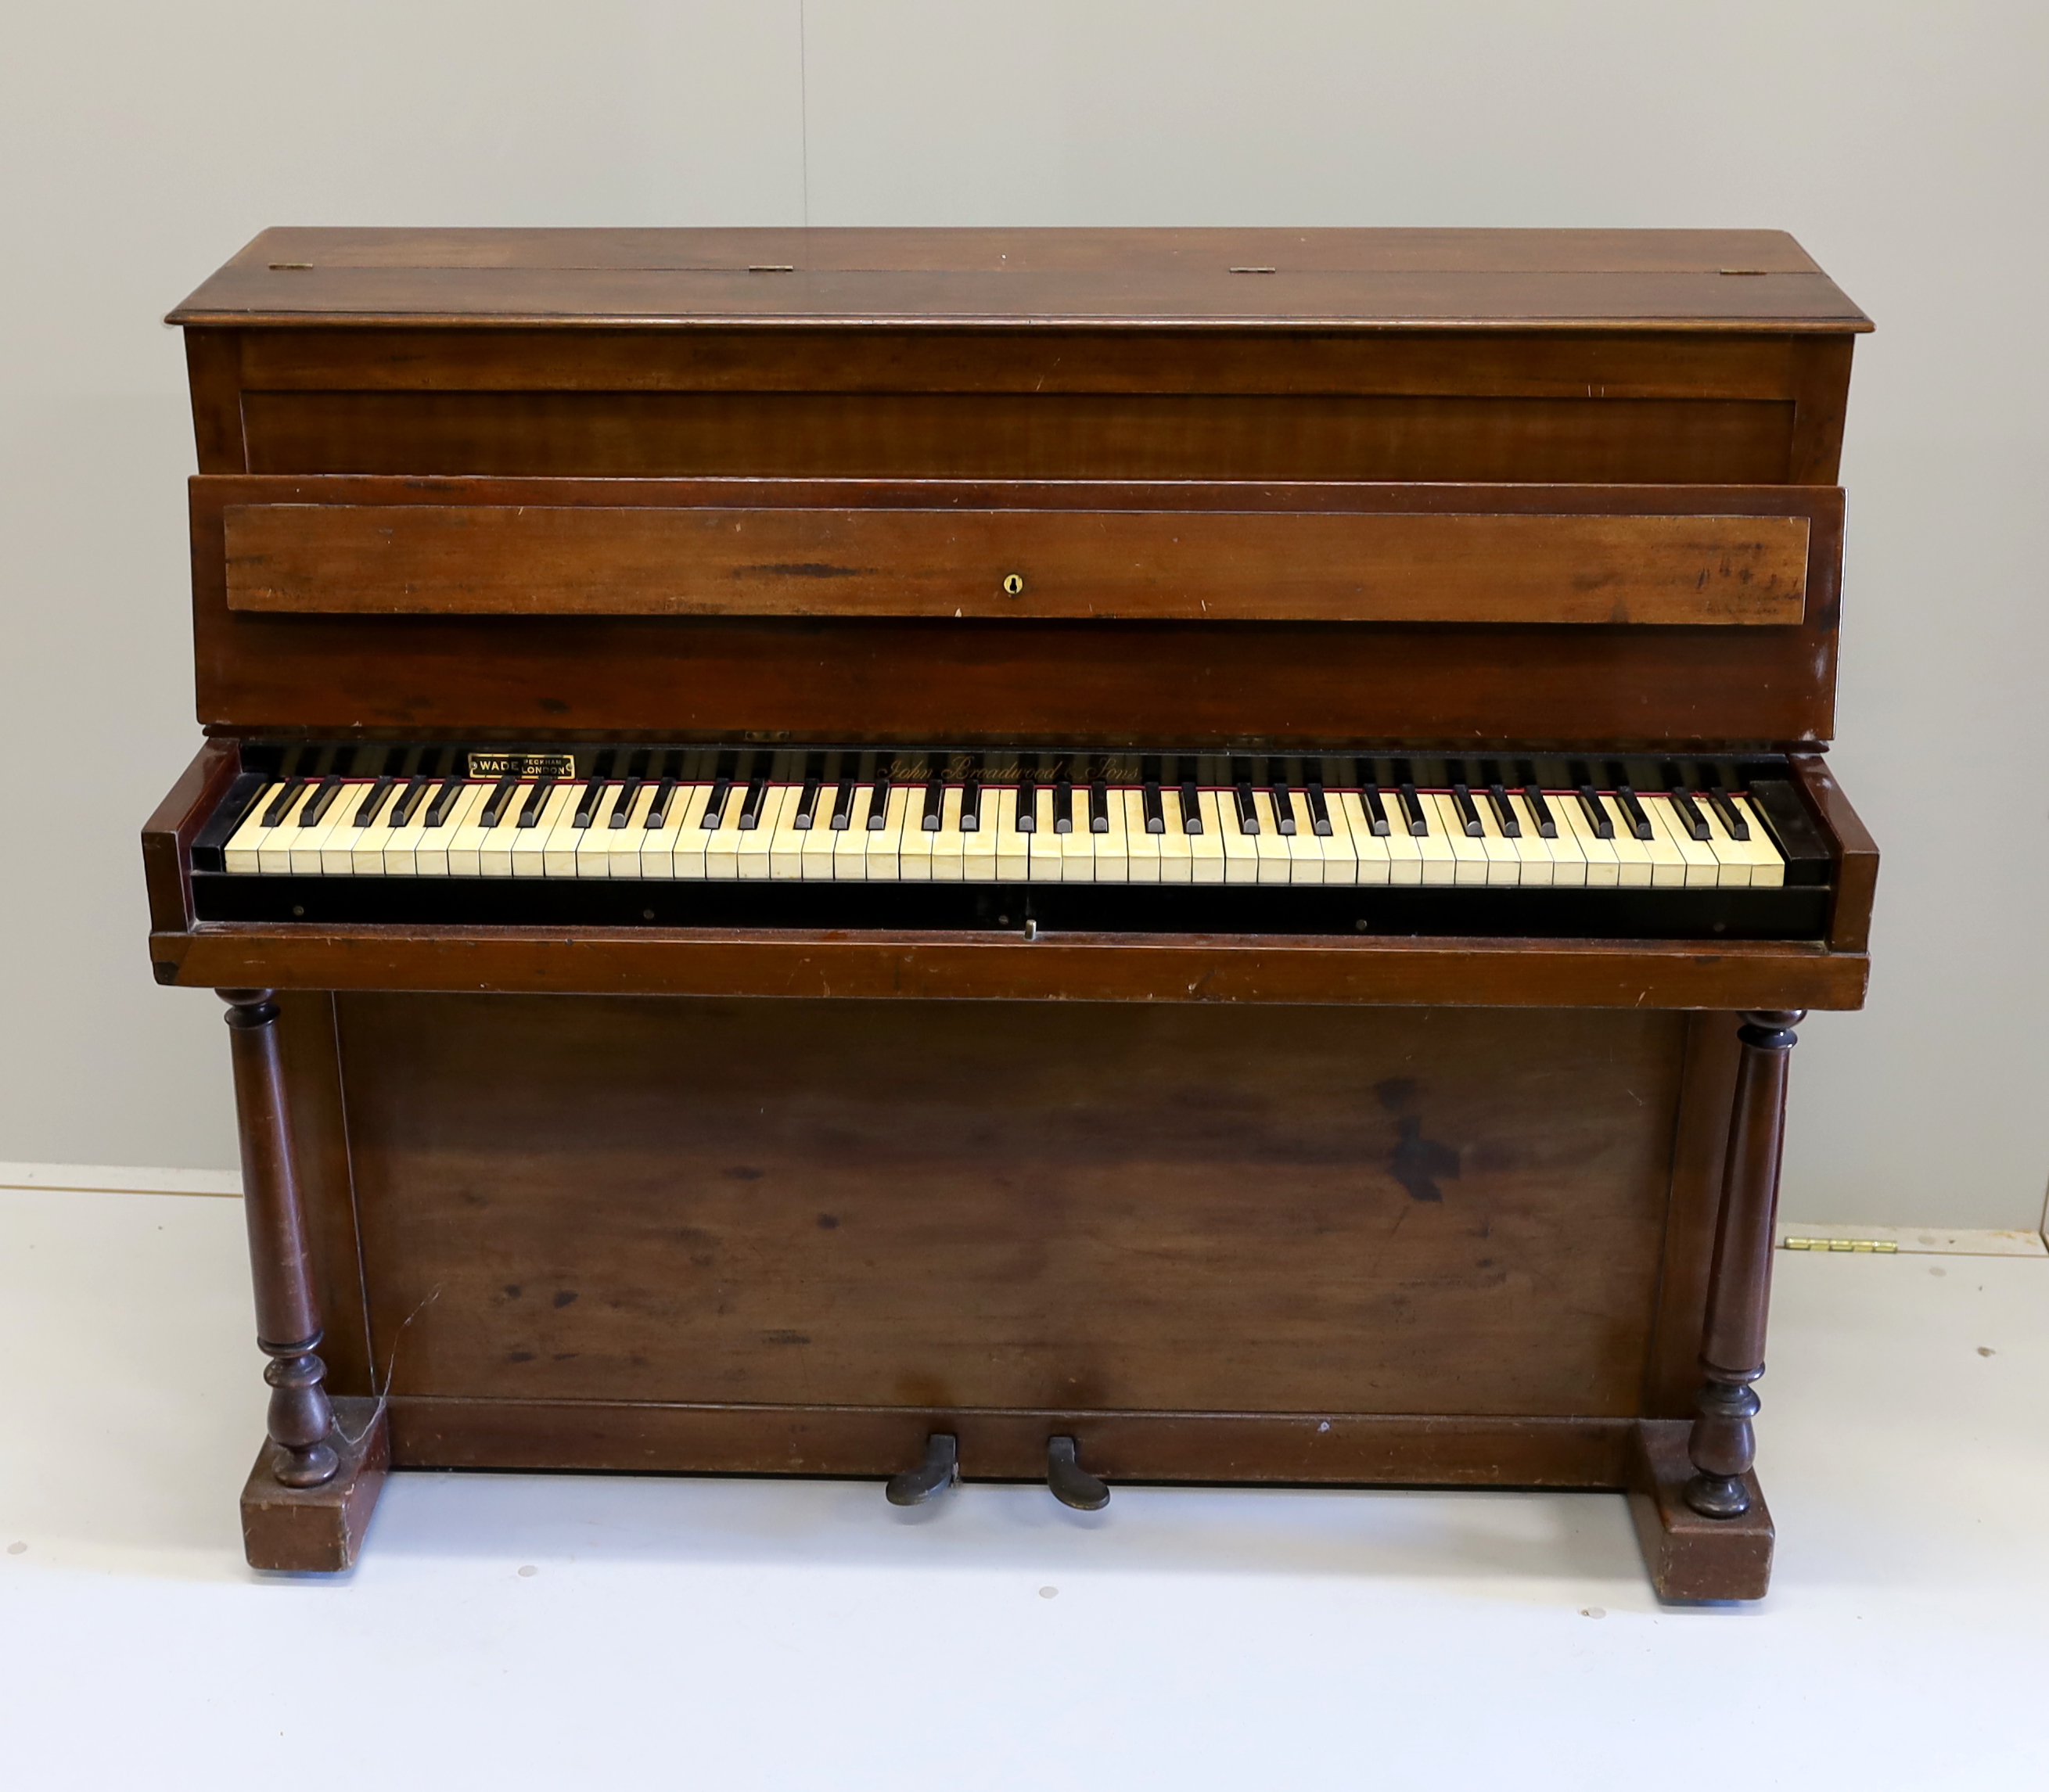 A John Broadwood & Sons upright piano, formerly the property of Sir Arthur Sullivan, a mahogany pianette model no.22 with 82 keys built in 1867